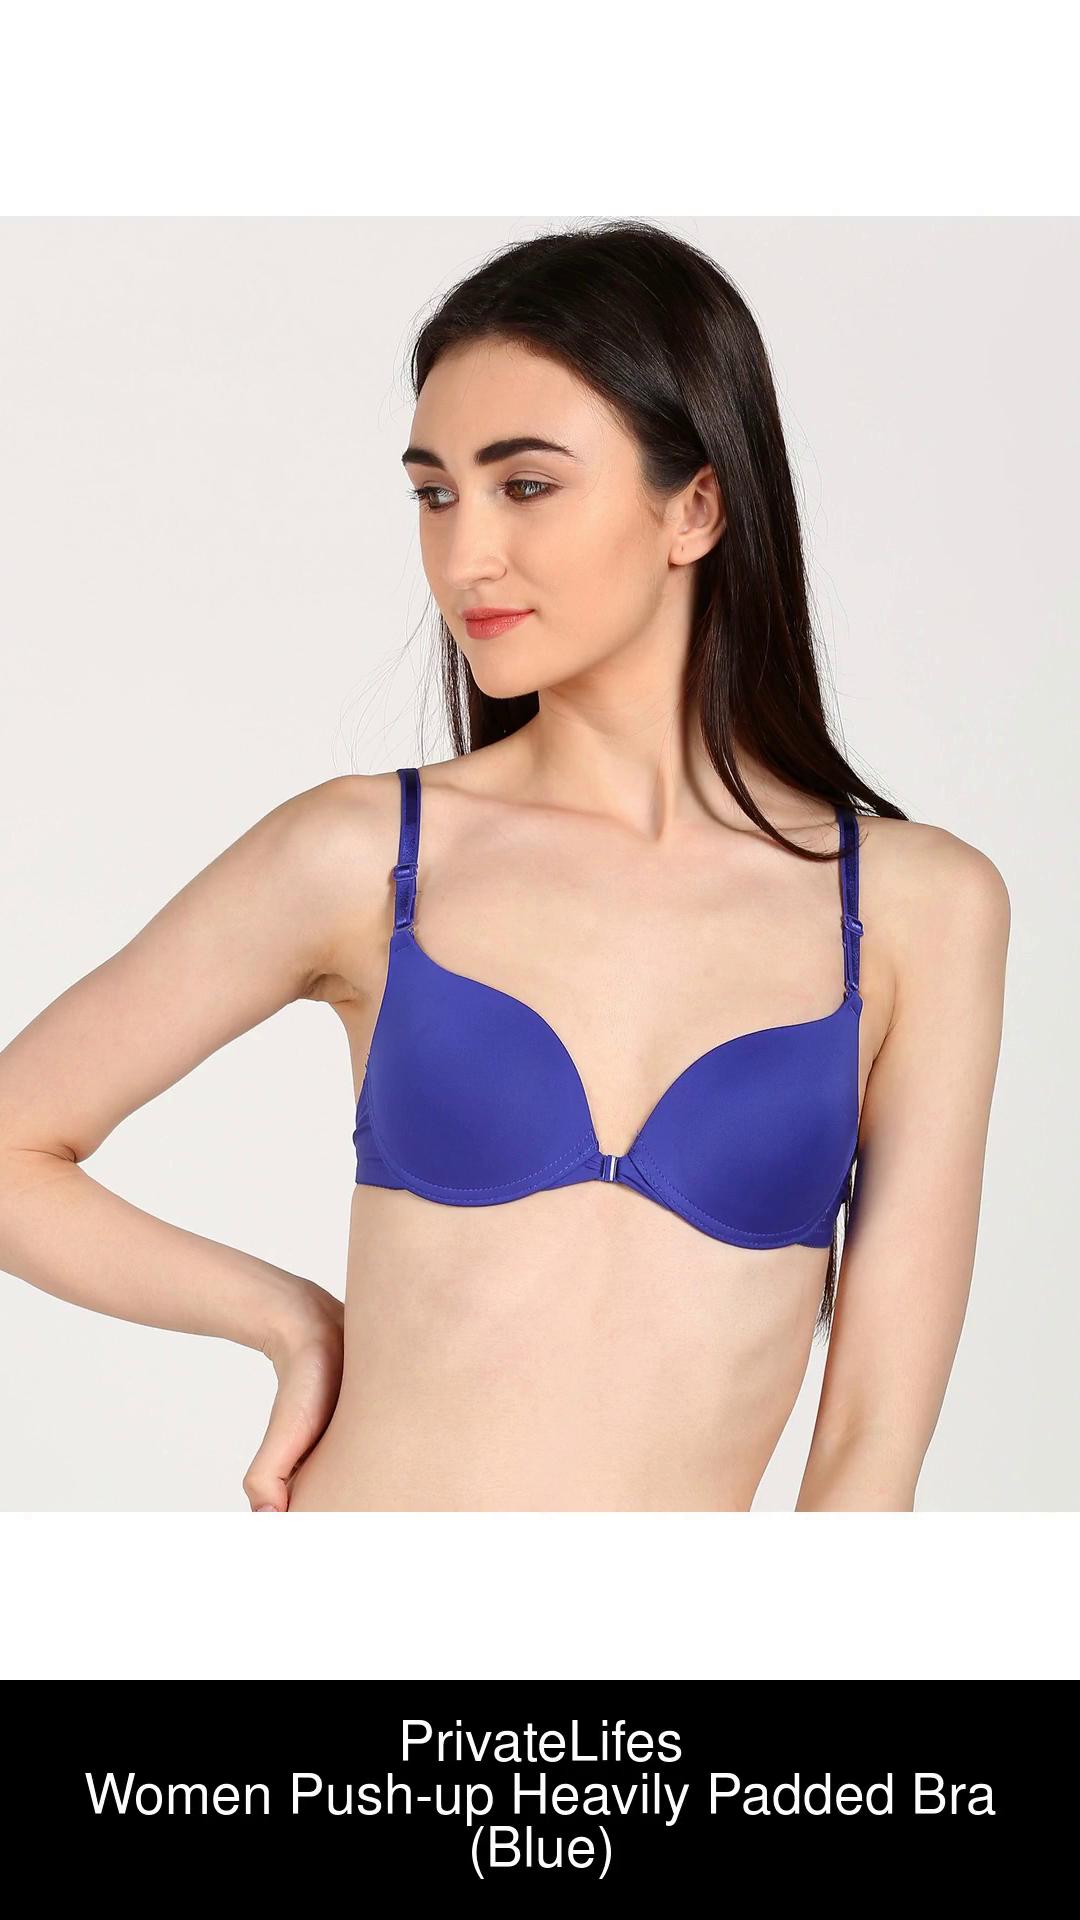 PrivateLifes Women Push-up Heavily Padded Bra - Buy Blue PrivateLifes Women  Push-up Heavily Padded Bra Online at Best Prices in India